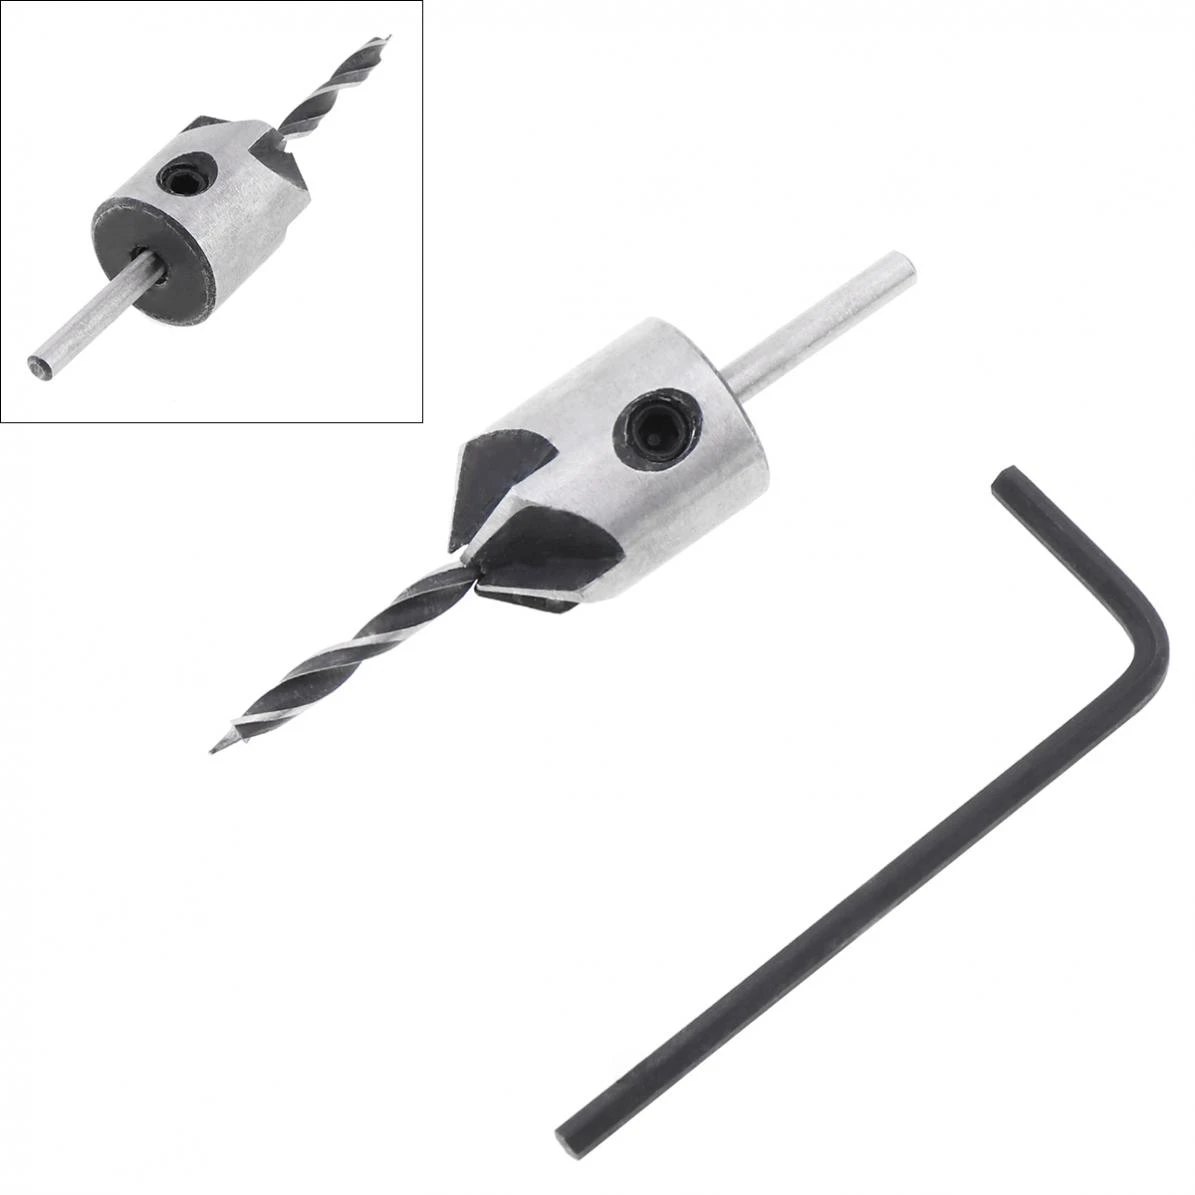 2pcs/set 3mm Universal HSS Carpentry Countersink Drill High Speed Steel Drill Bit + Wrench Woodwork ools Suitable for Drill Bit